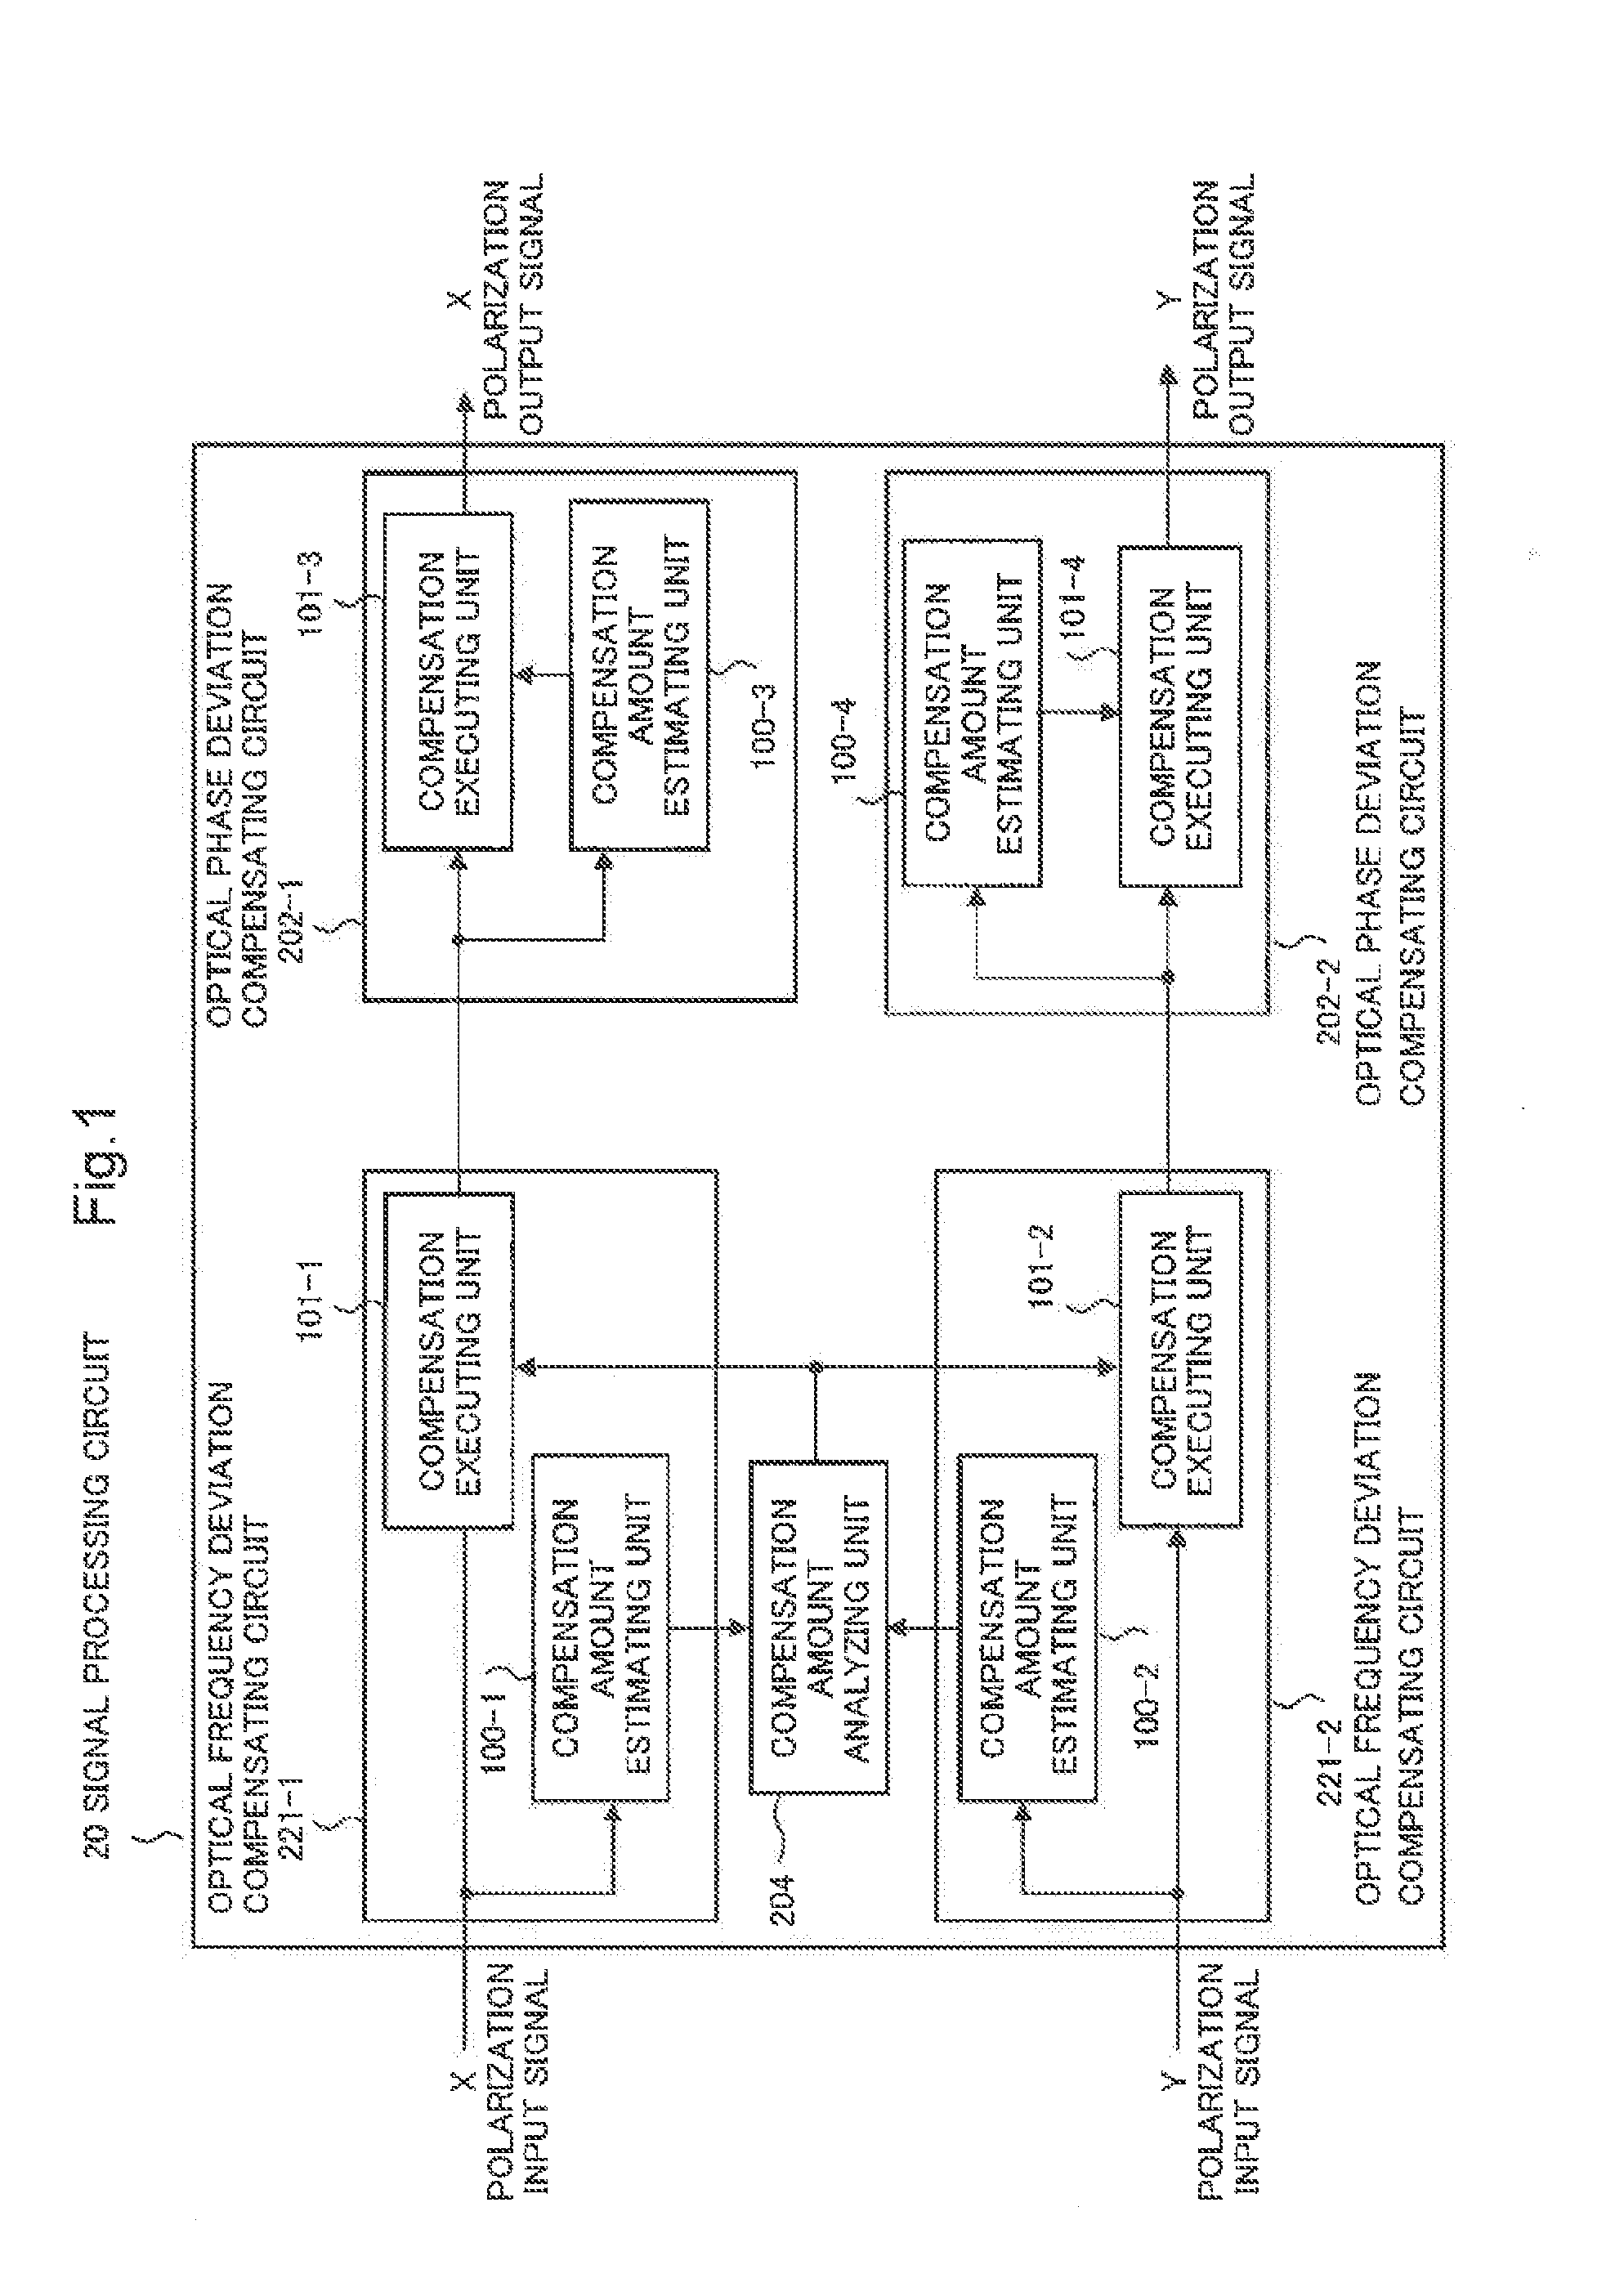 Signal processing circuit, signal processing method, optical receiver and optical communication system